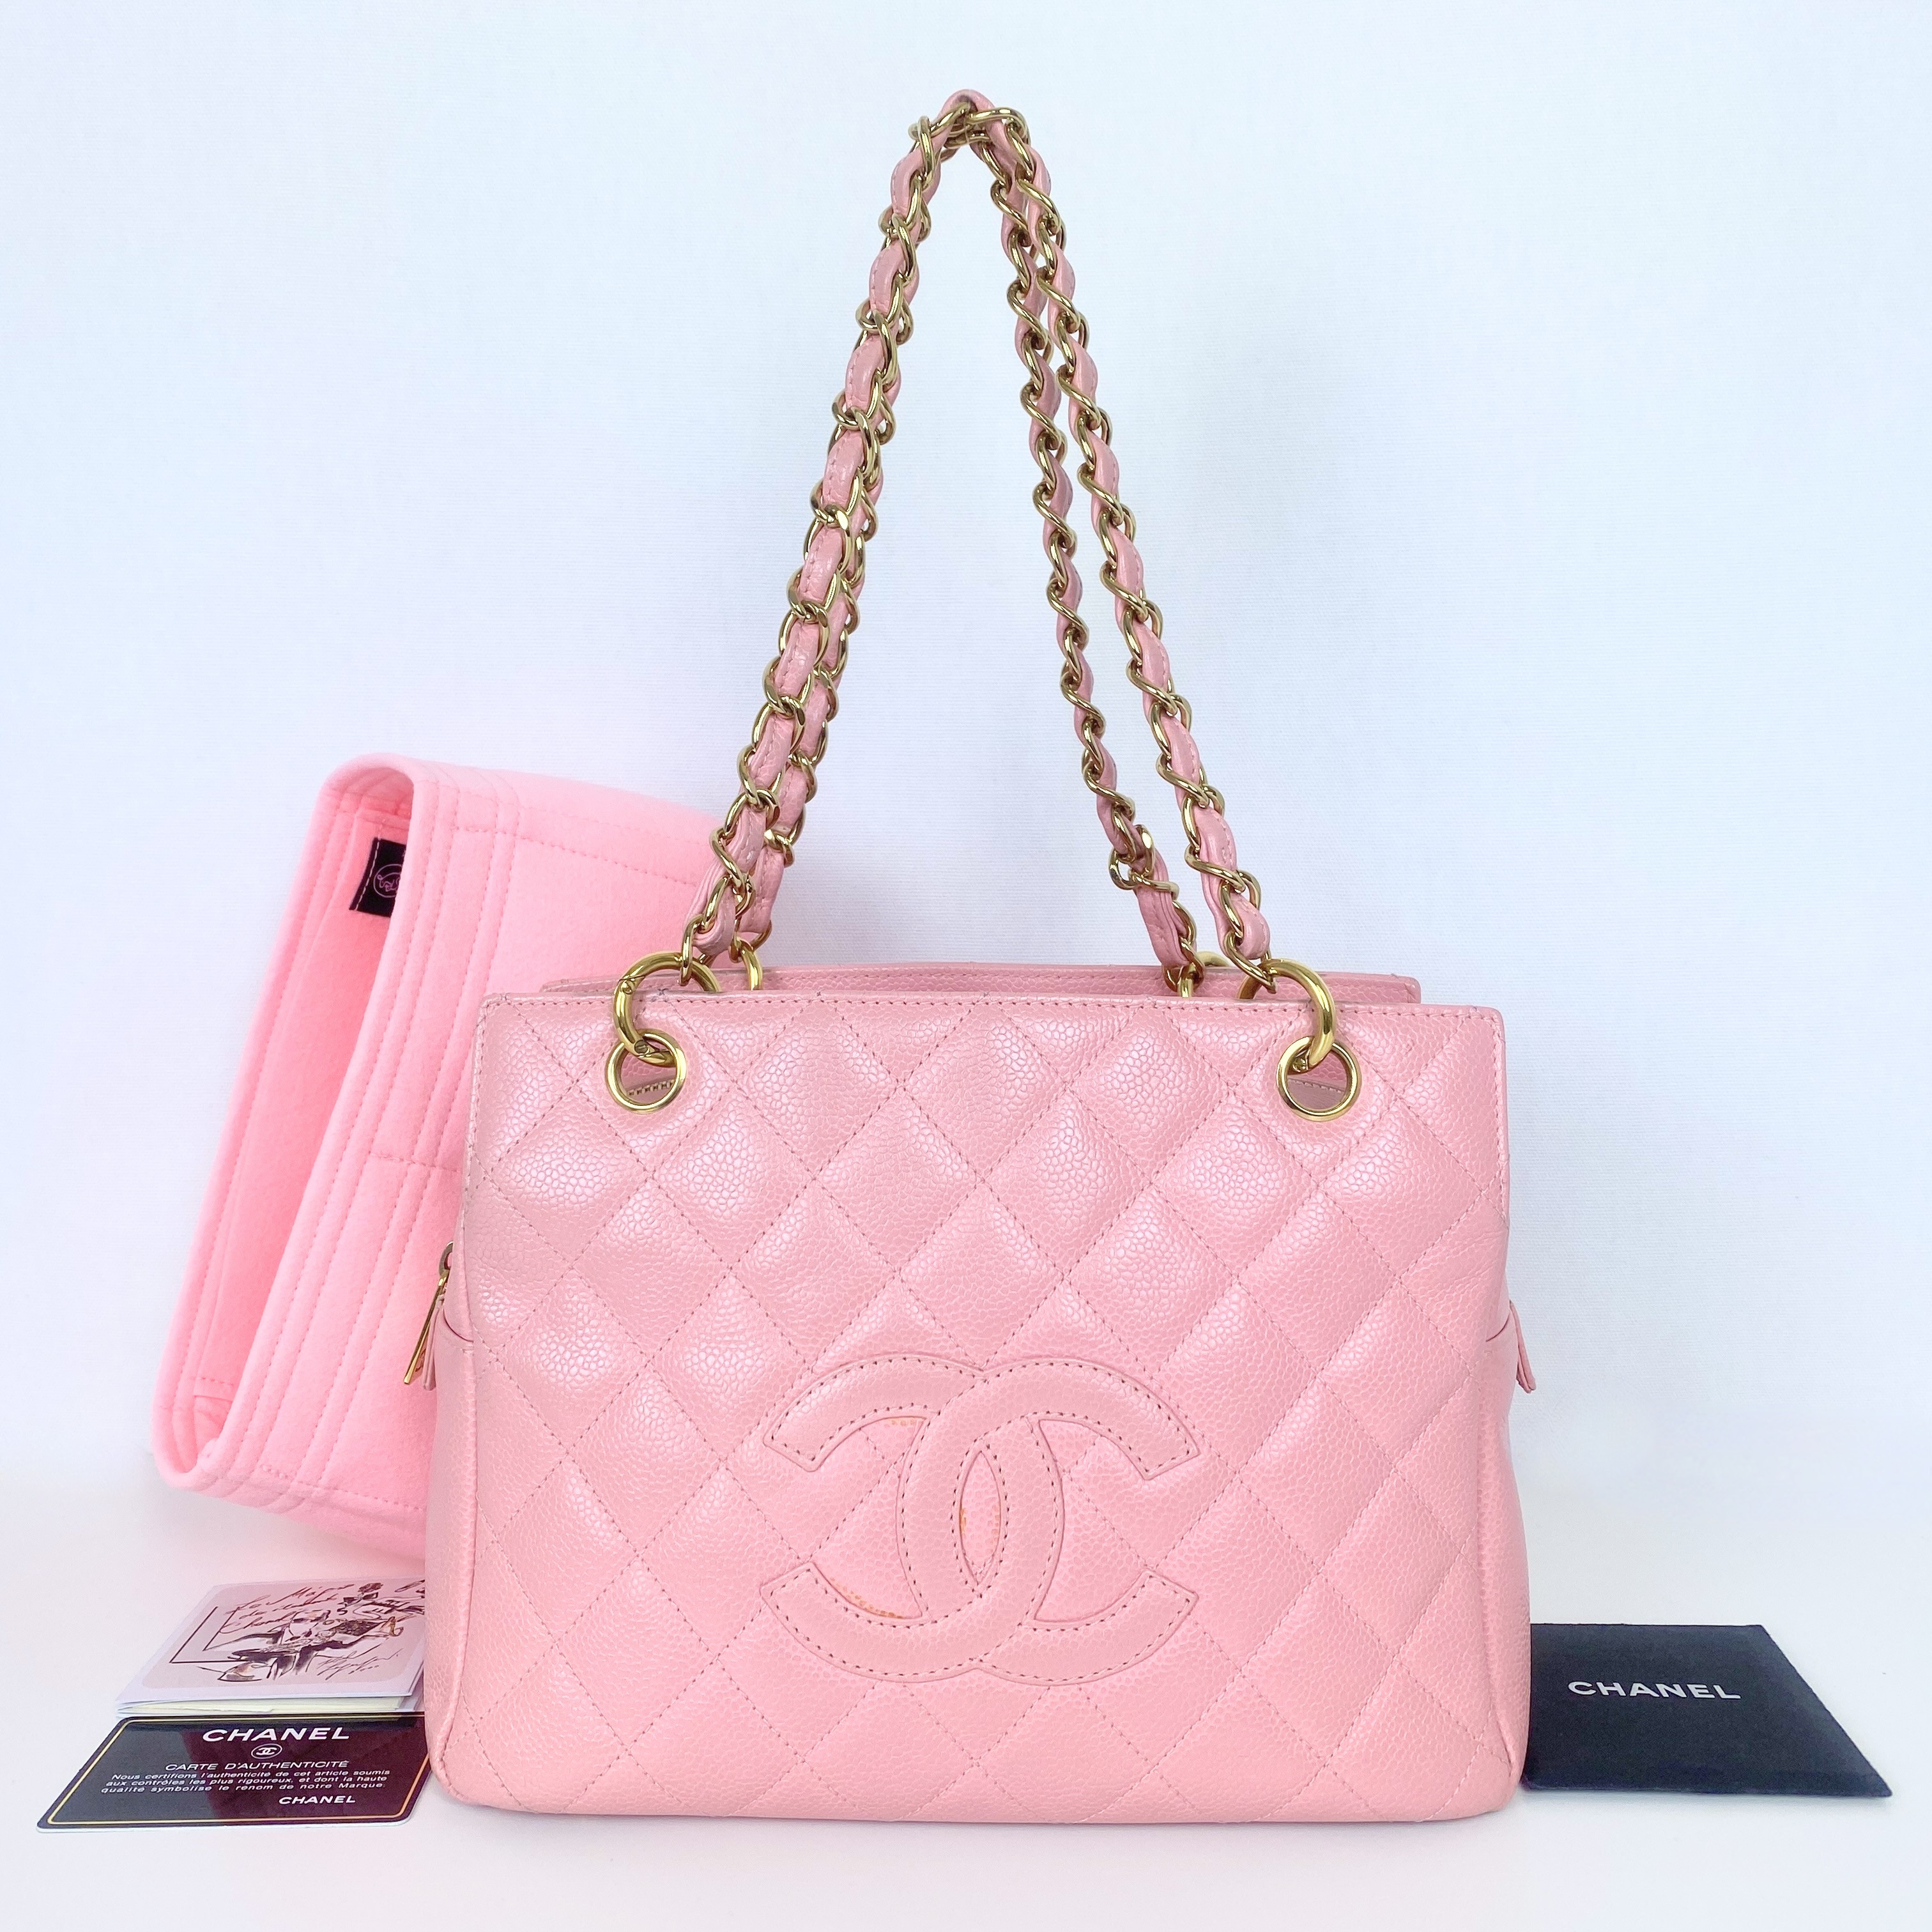 Chanel GST Discontinued?